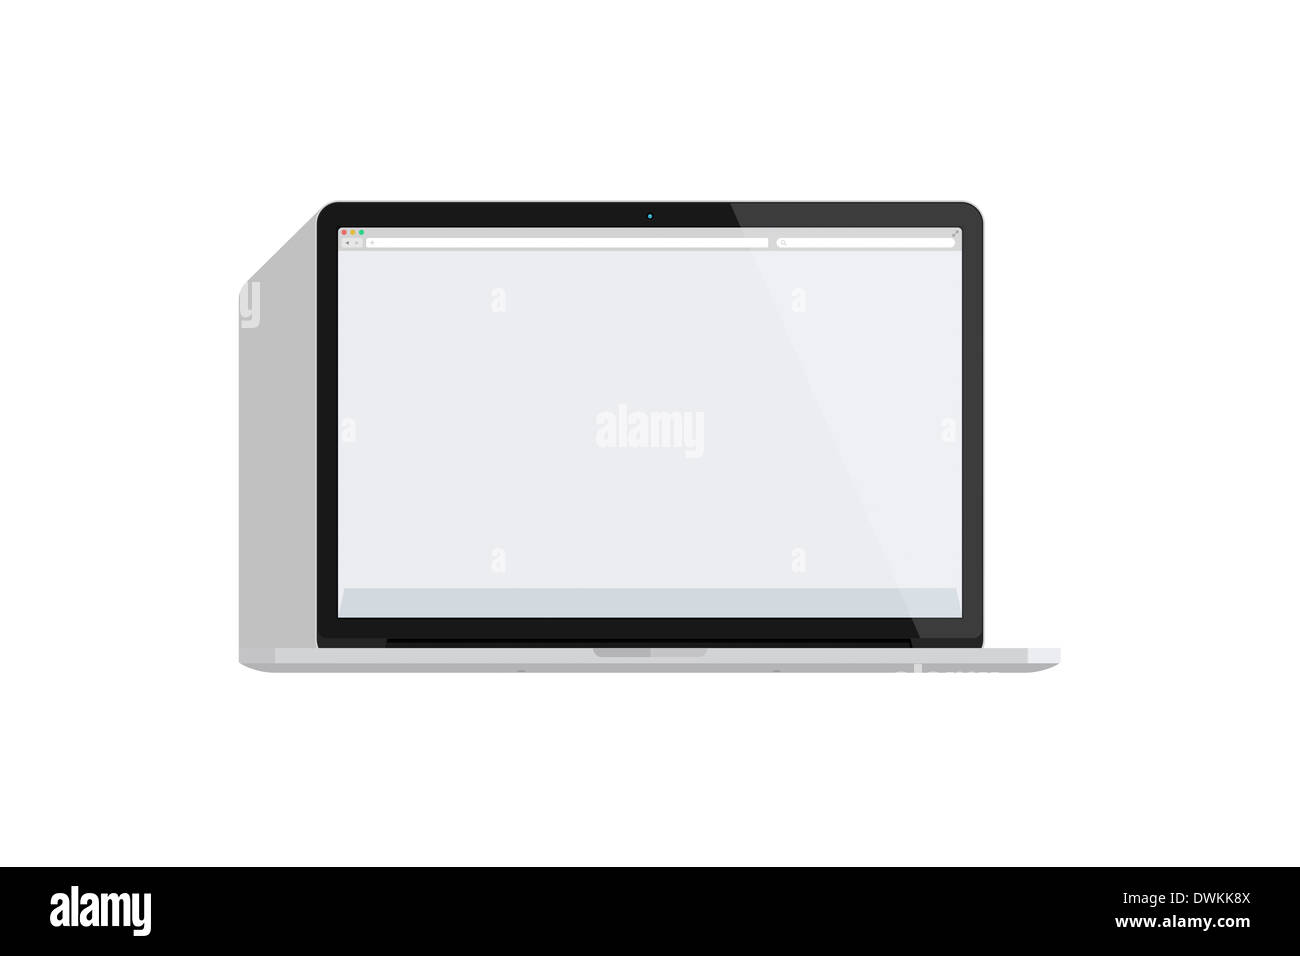 Illustration of a mac book, white background. Stock Photo